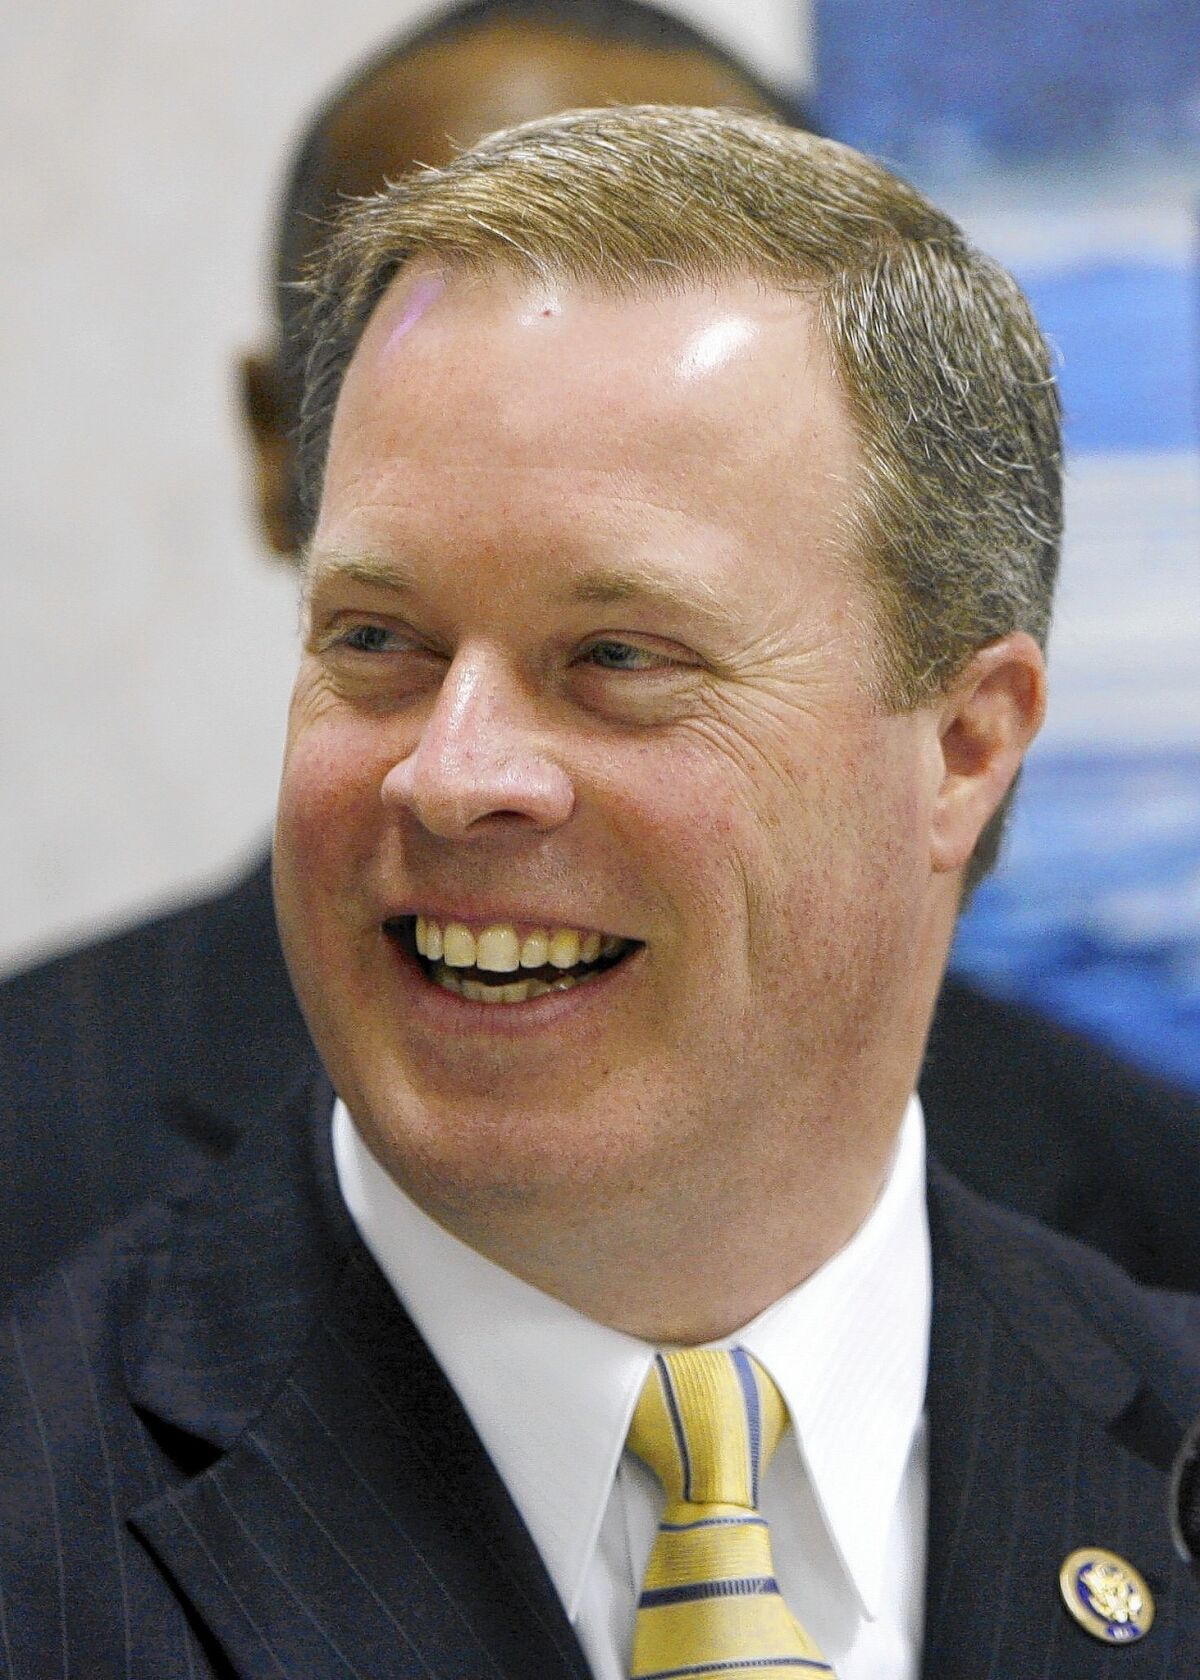 During the 2010 campaign, then-Rep. Steve Driehaus (D-Ohio) demanded that a campaign billboard targeting him be blocked, citing a state law barring false statements about political candidates. Driehaus lost his reelection bid before the case was settled, and it is now to be heard by the Supreme Court.